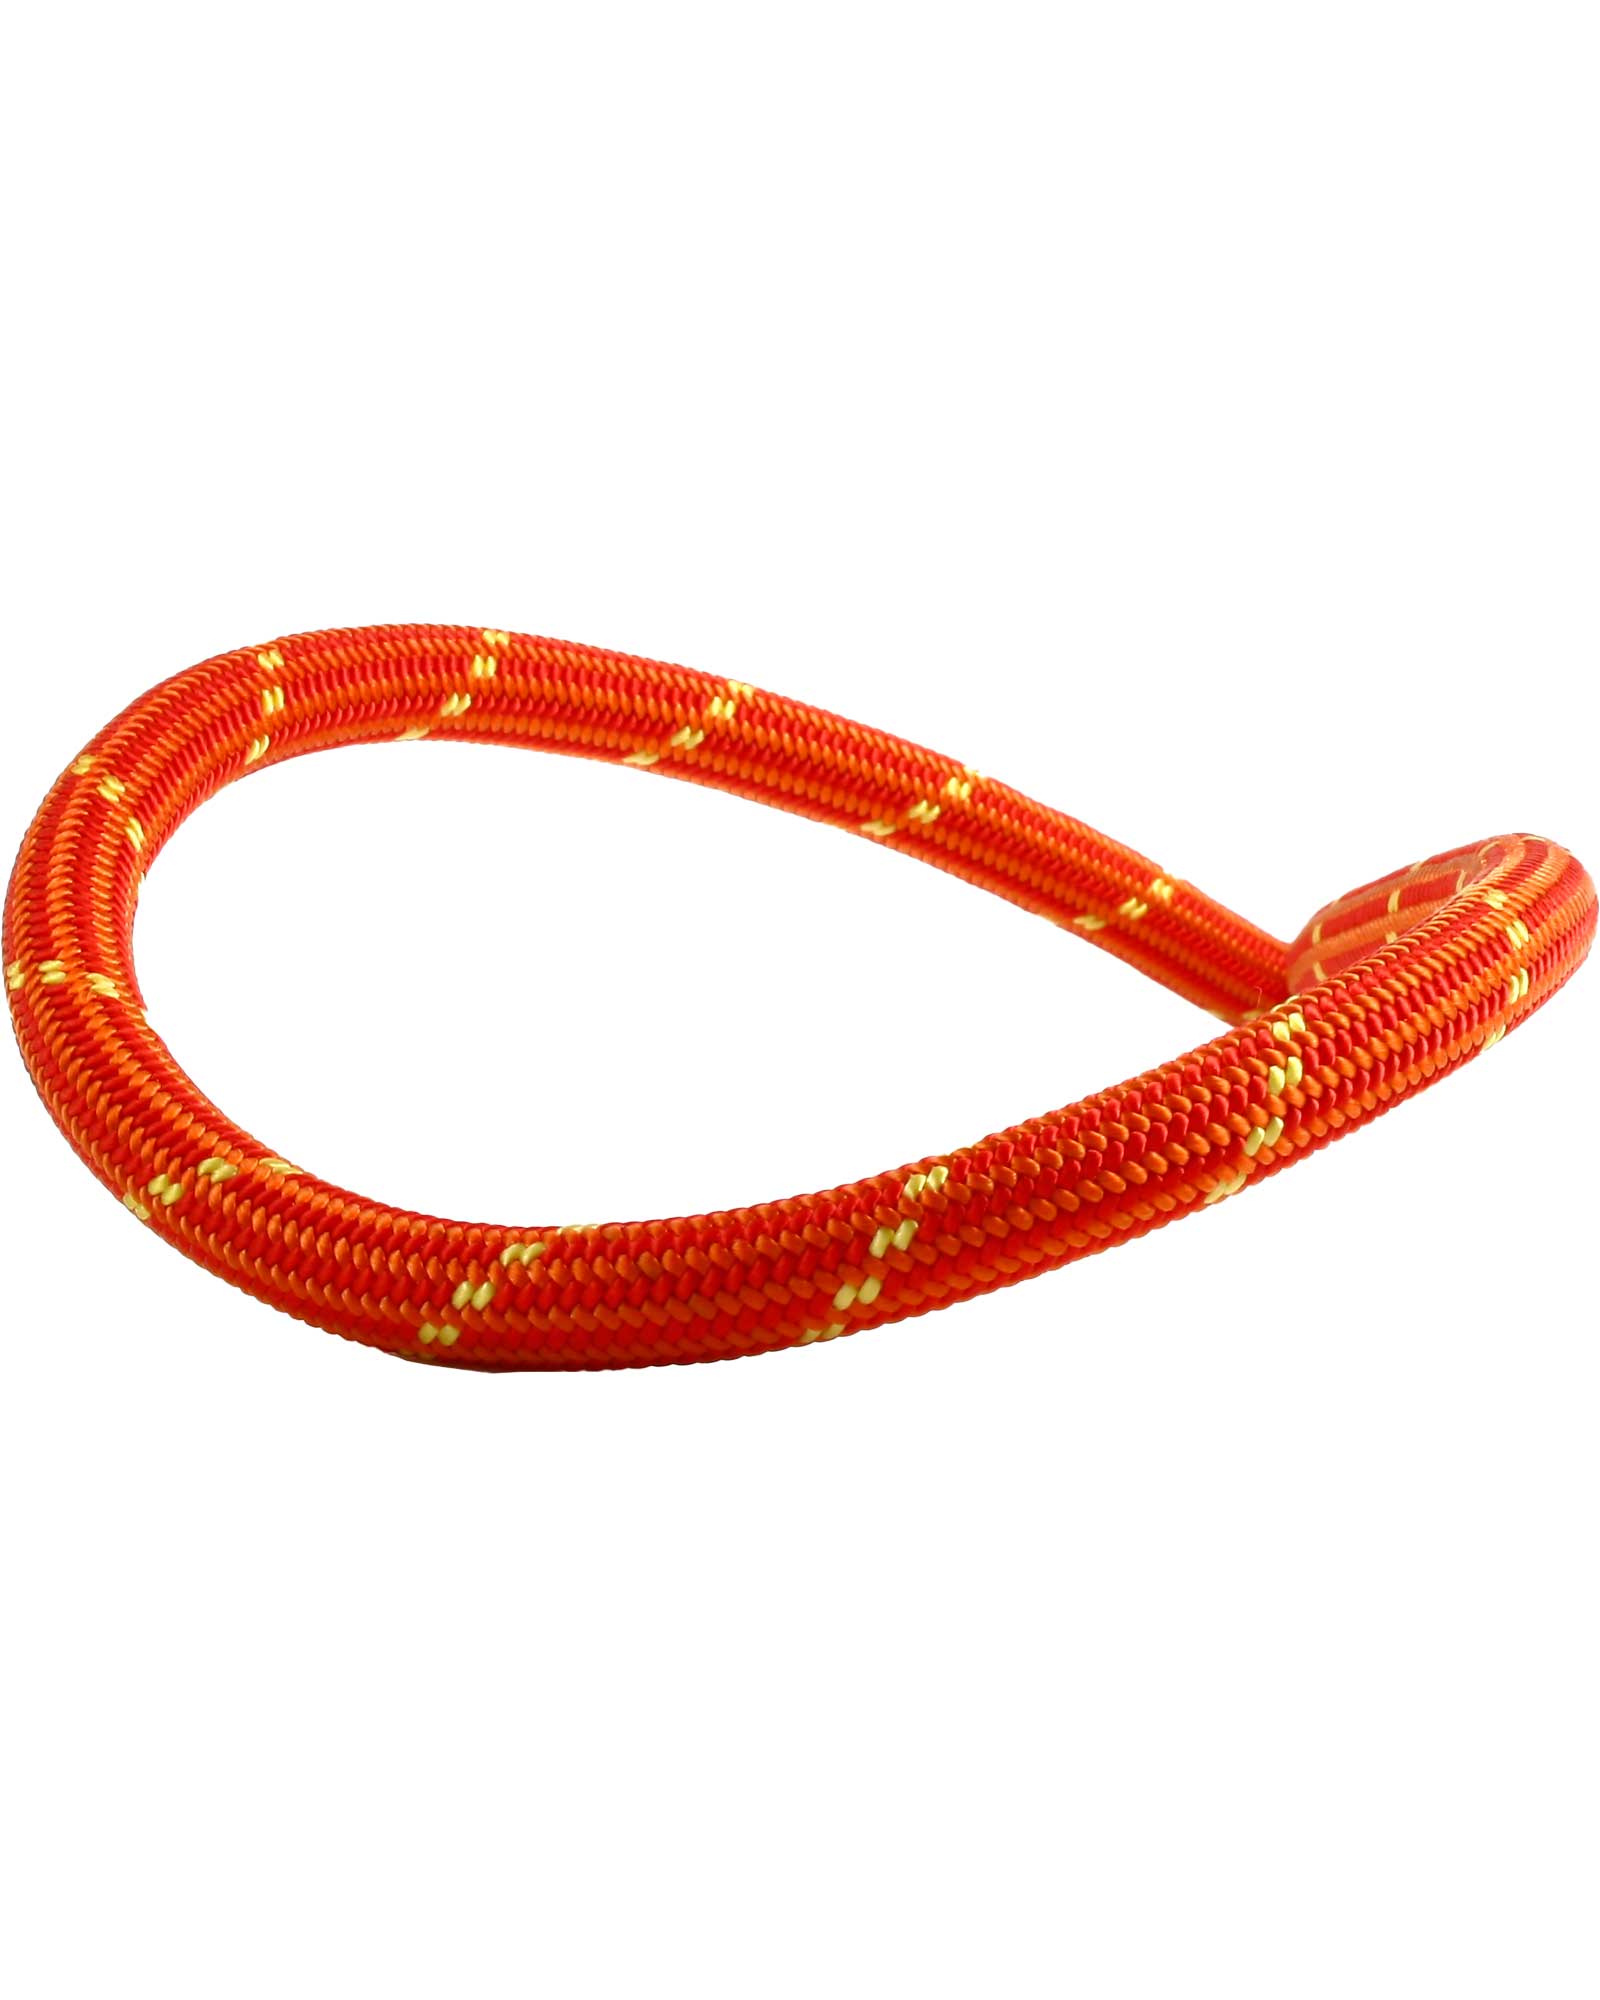 Edelweiss Energy 9.5mm x 70m Rope - Red 70m